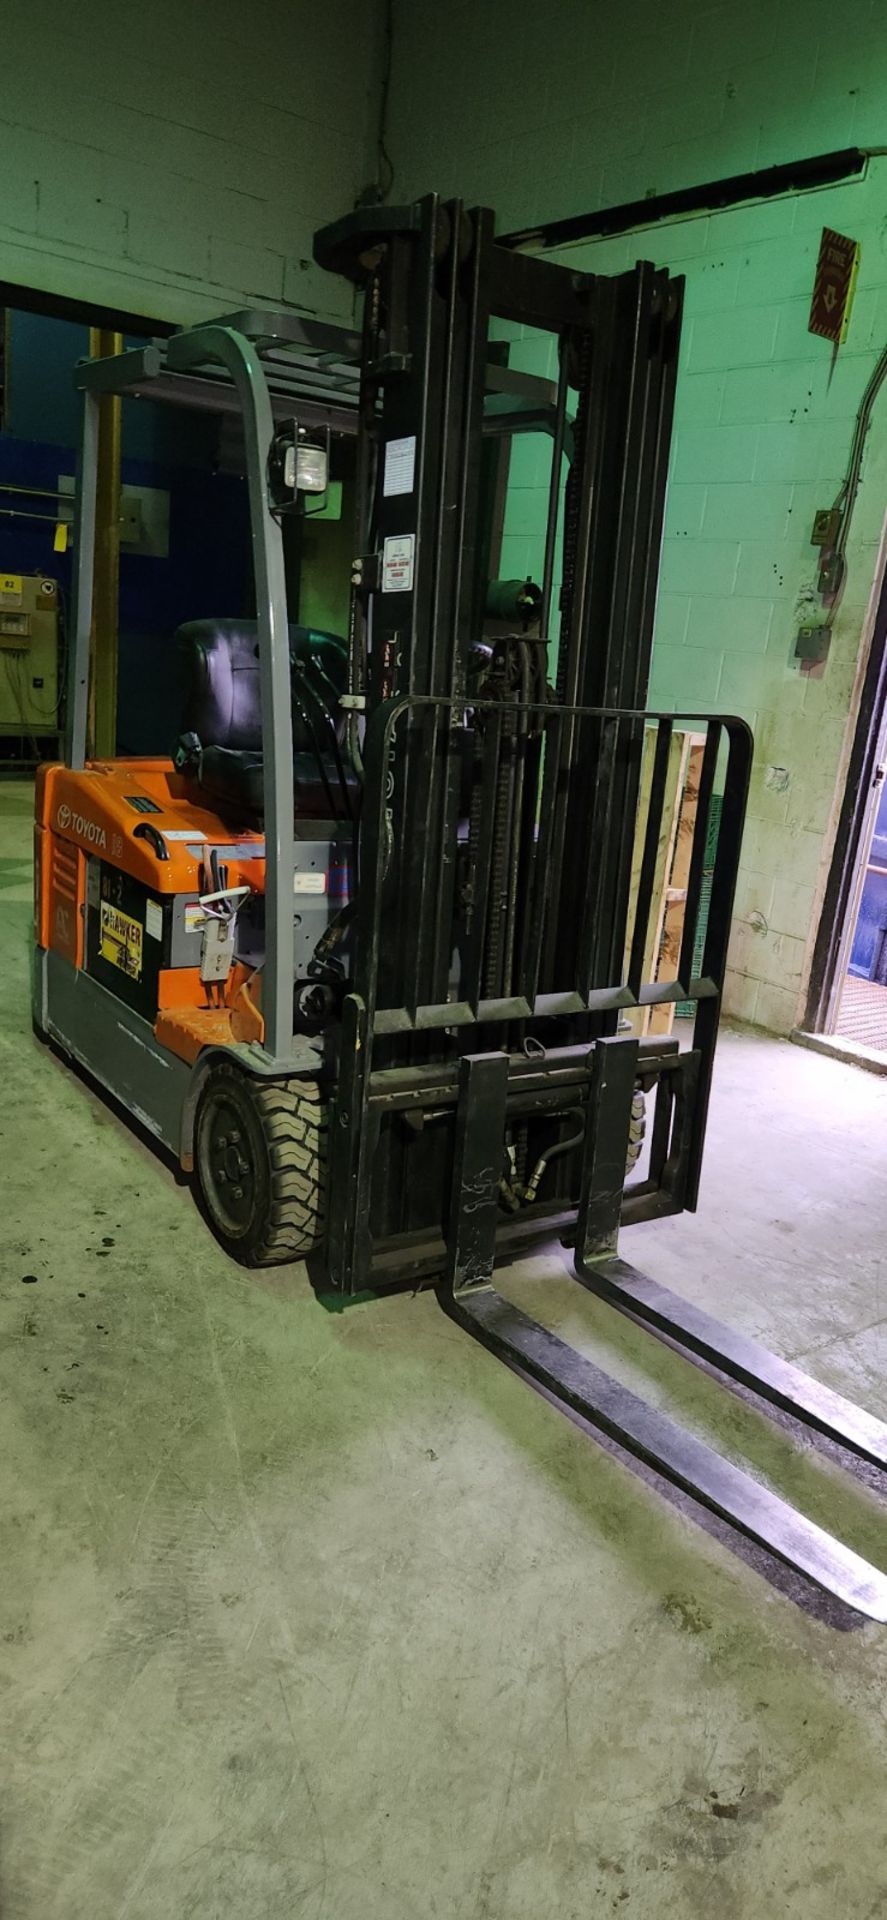 TOYOTA 7FBEU18 ELECTRIC FORKLIFT, S/N 15433, 2,900LB CAP., 189" MAX LIFT, 3-STAGE MAST, SIDE - Image 2 of 14